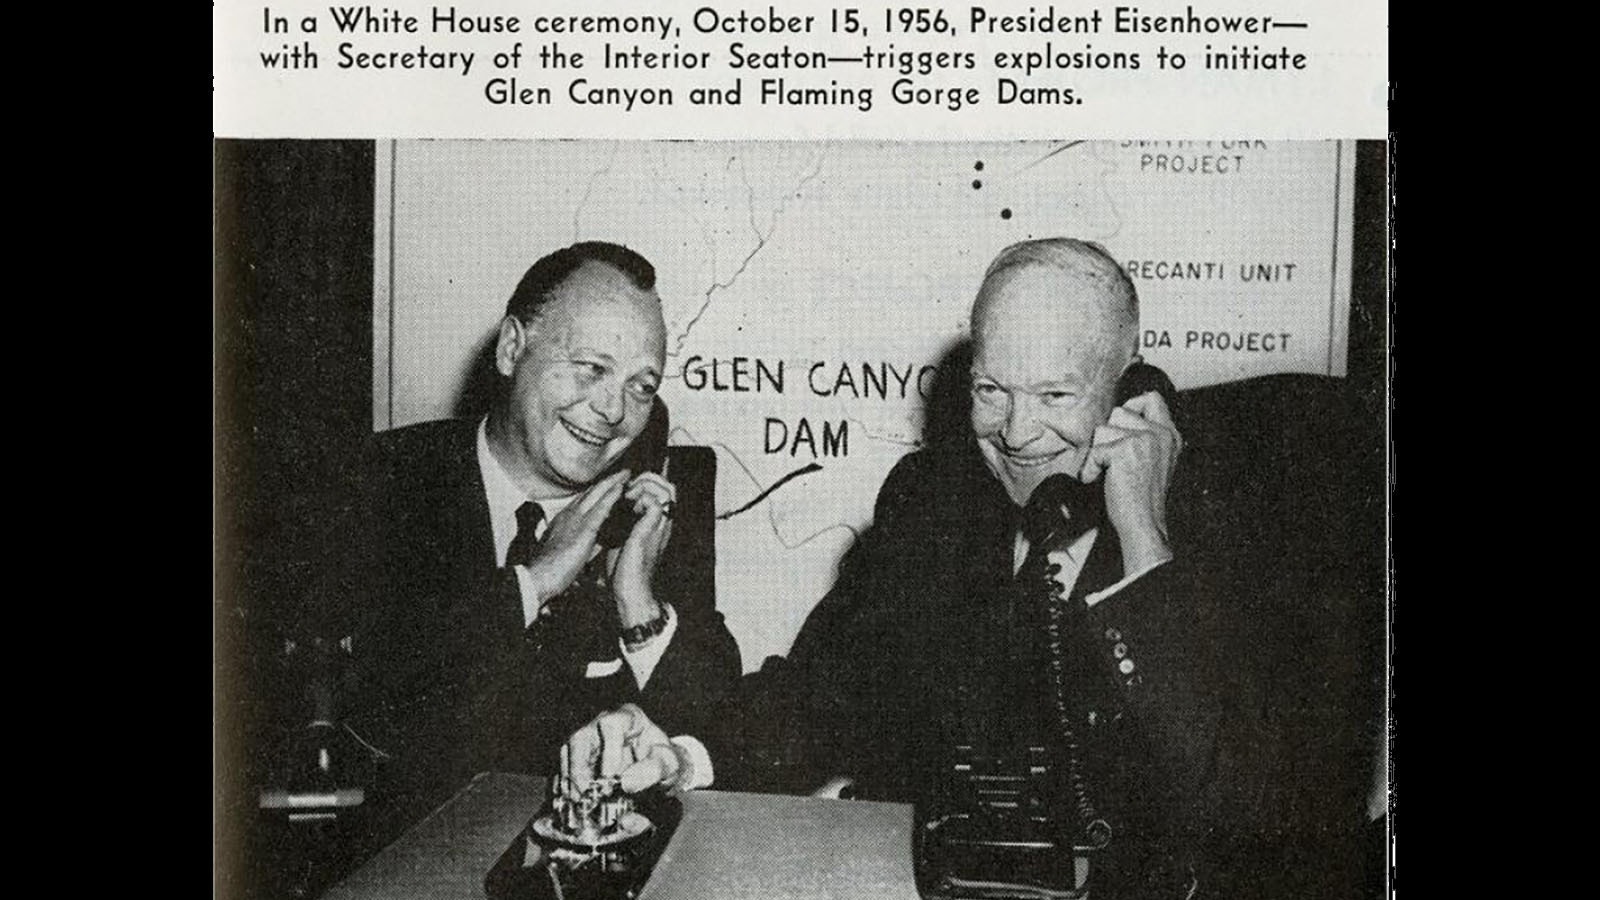 President Dwight D. Eisenhower, left, with Secretary of the Interior Fred A. Seaton as they order the explosions that began construction on the Flaming Gorge and Glen Canyon dams.